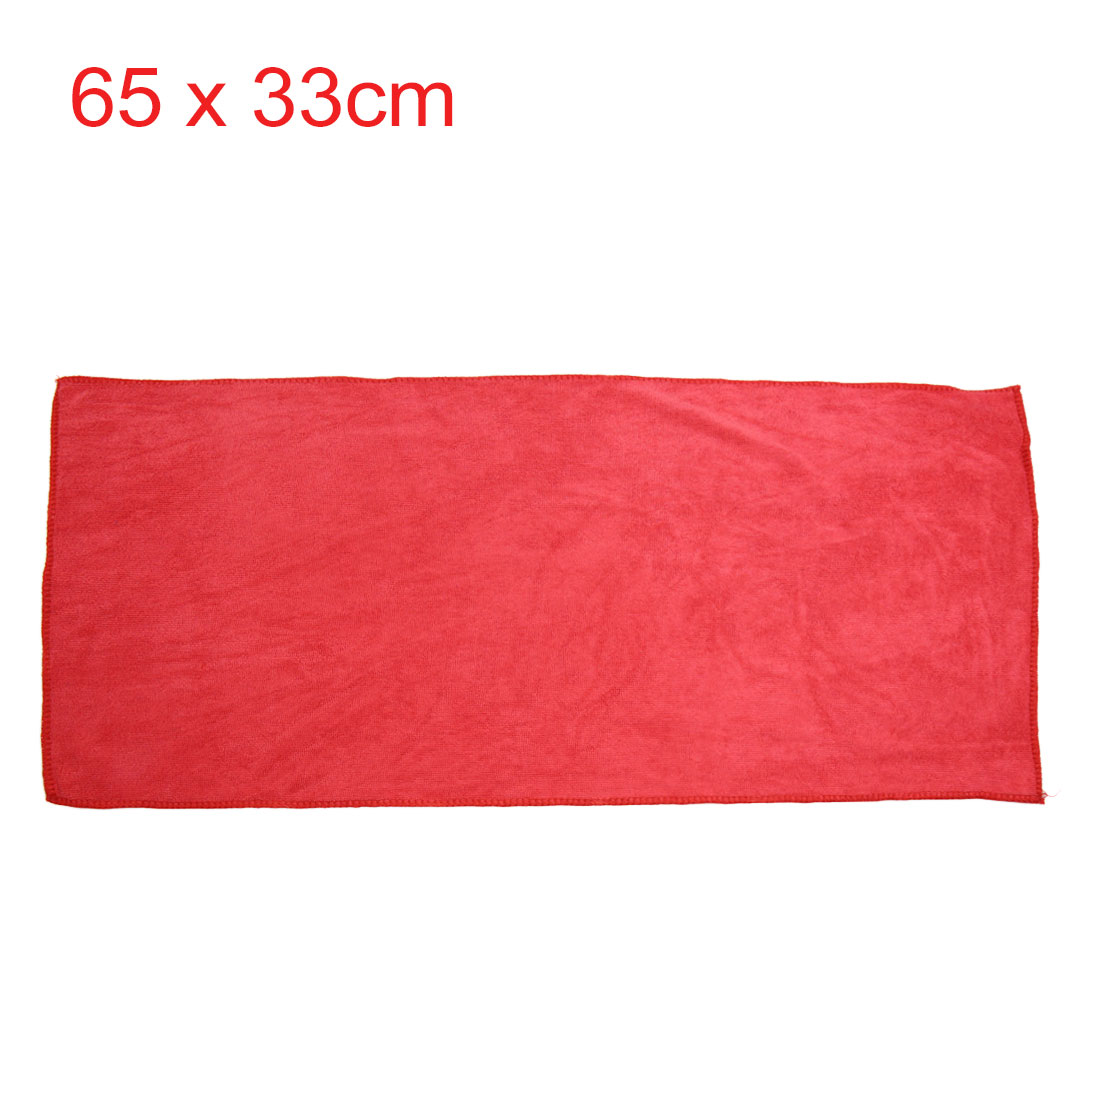 Unique Bargains 2pcs 65 x 33cm 250GSM Microfiber Towel Cleaning Cloths for Auto Car Washing Red - image 2 of 3